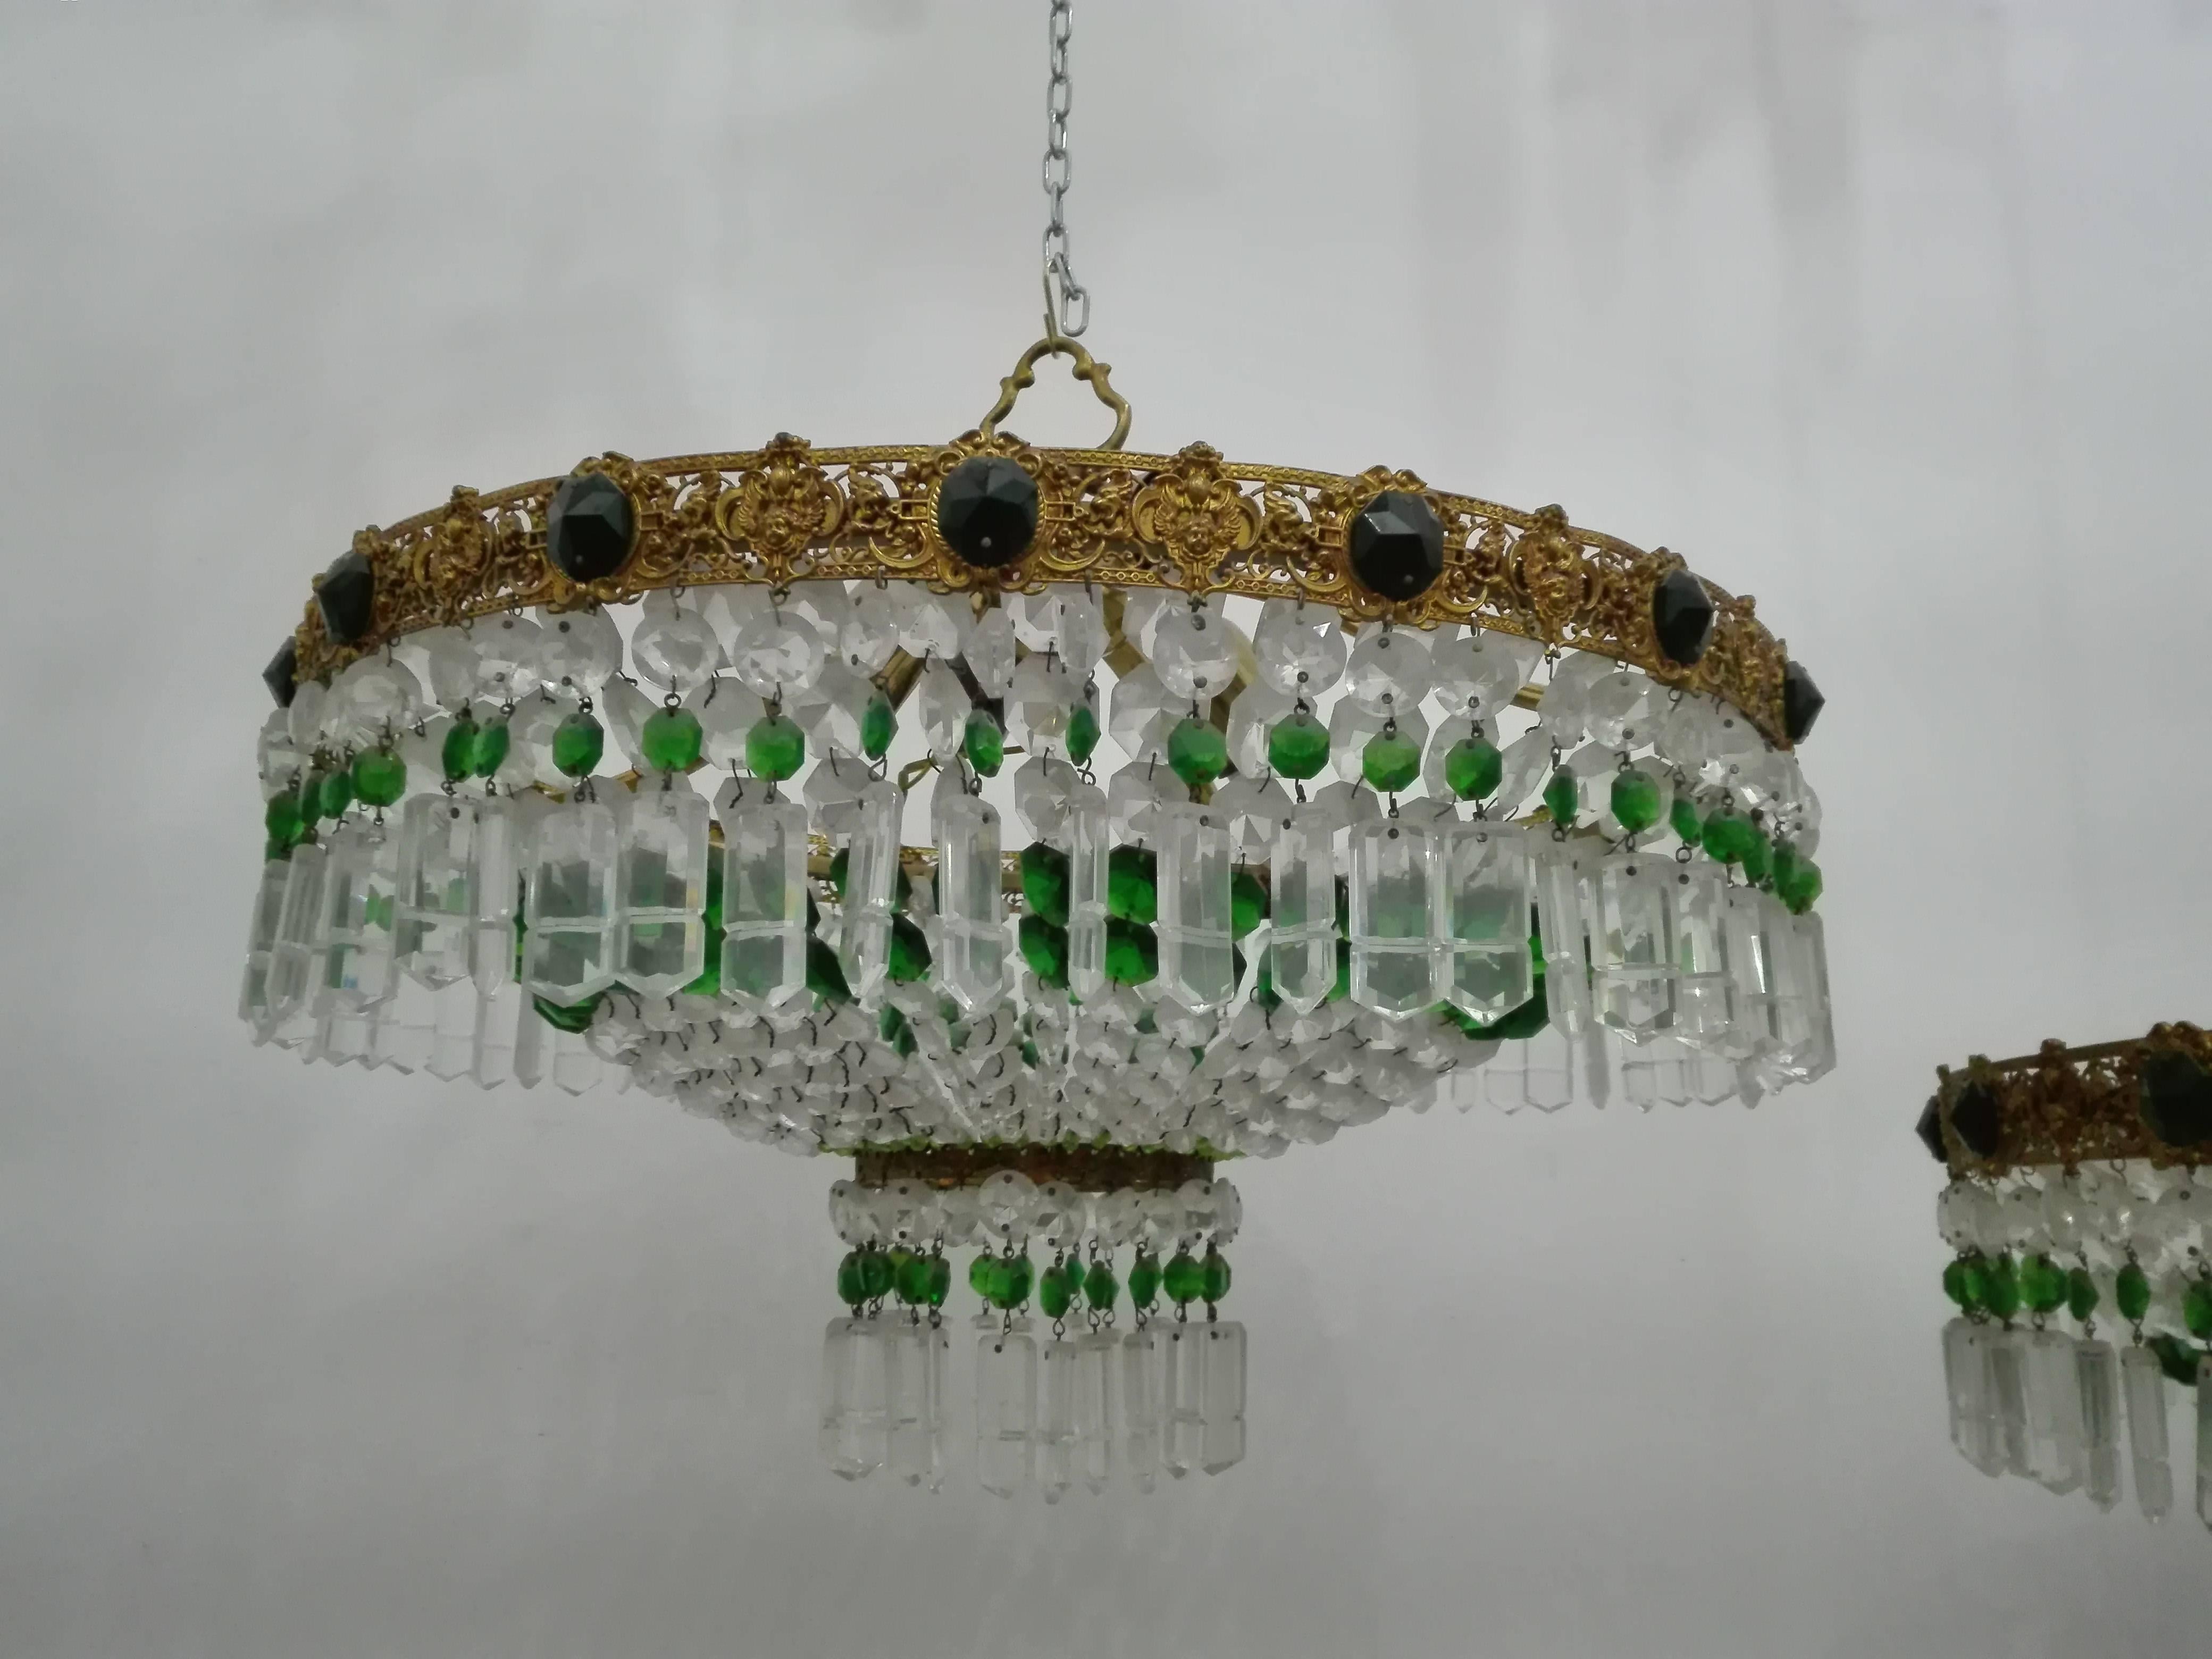 Pair of ceiling lights with green and transparent crystals with brass band worked with angels and dragons missing only a pendant as pictured (see photo) ceiling light with four-light points
Dimensions:
diameter 55 cm
height 45 cm.